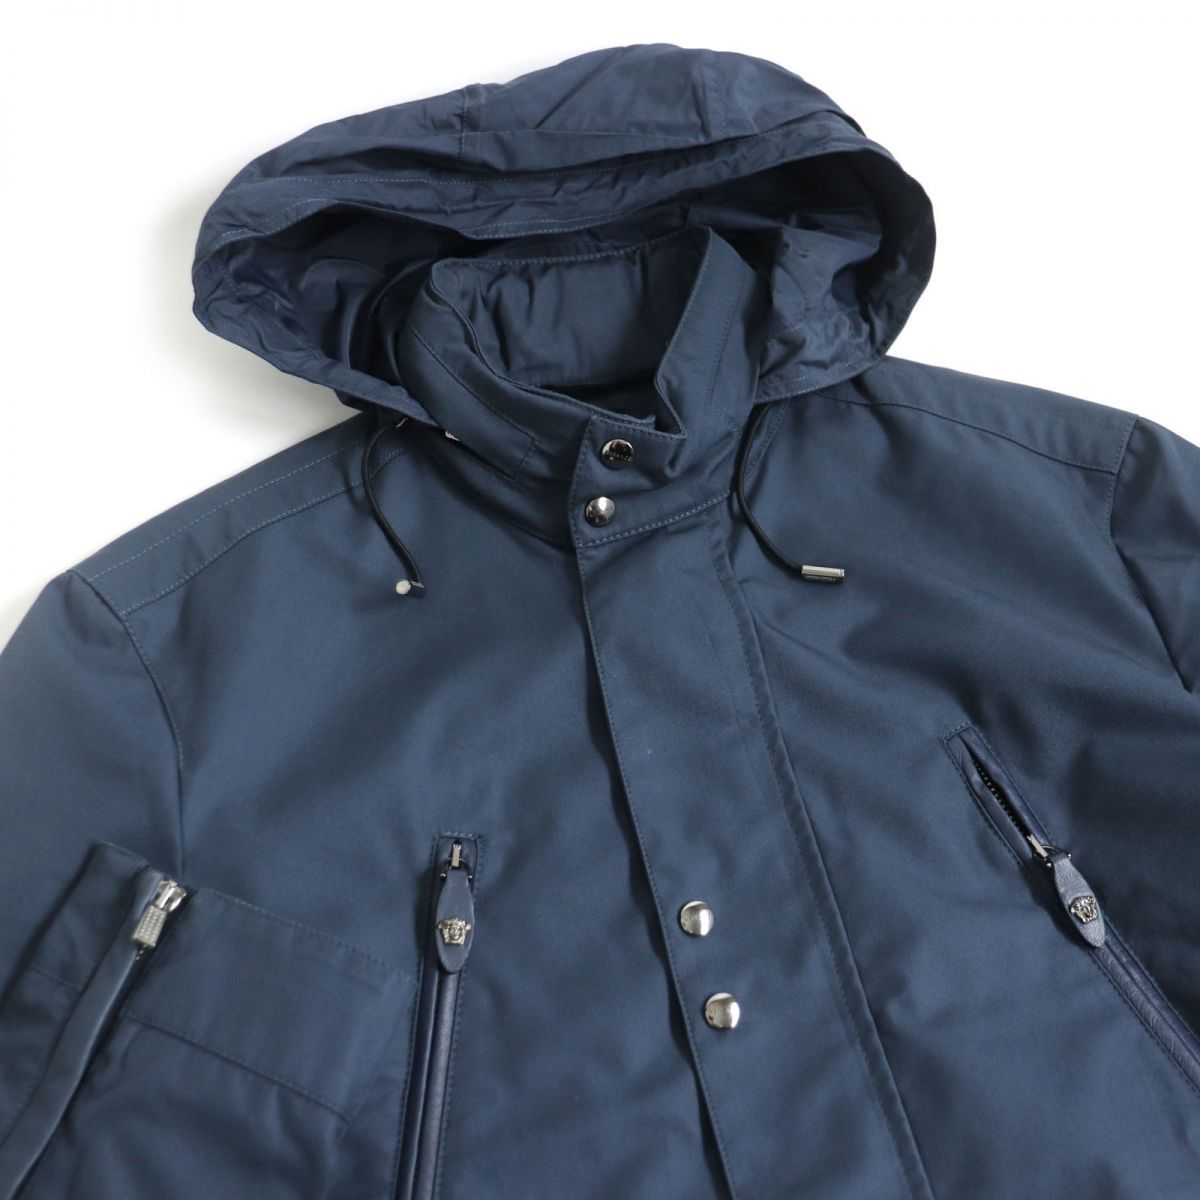  superior article * Versace lining mete.-sa total pattern ram leather elbow patch ZIPUP hood entering Work jacket / blouson 44 blue Italy made regular goods 